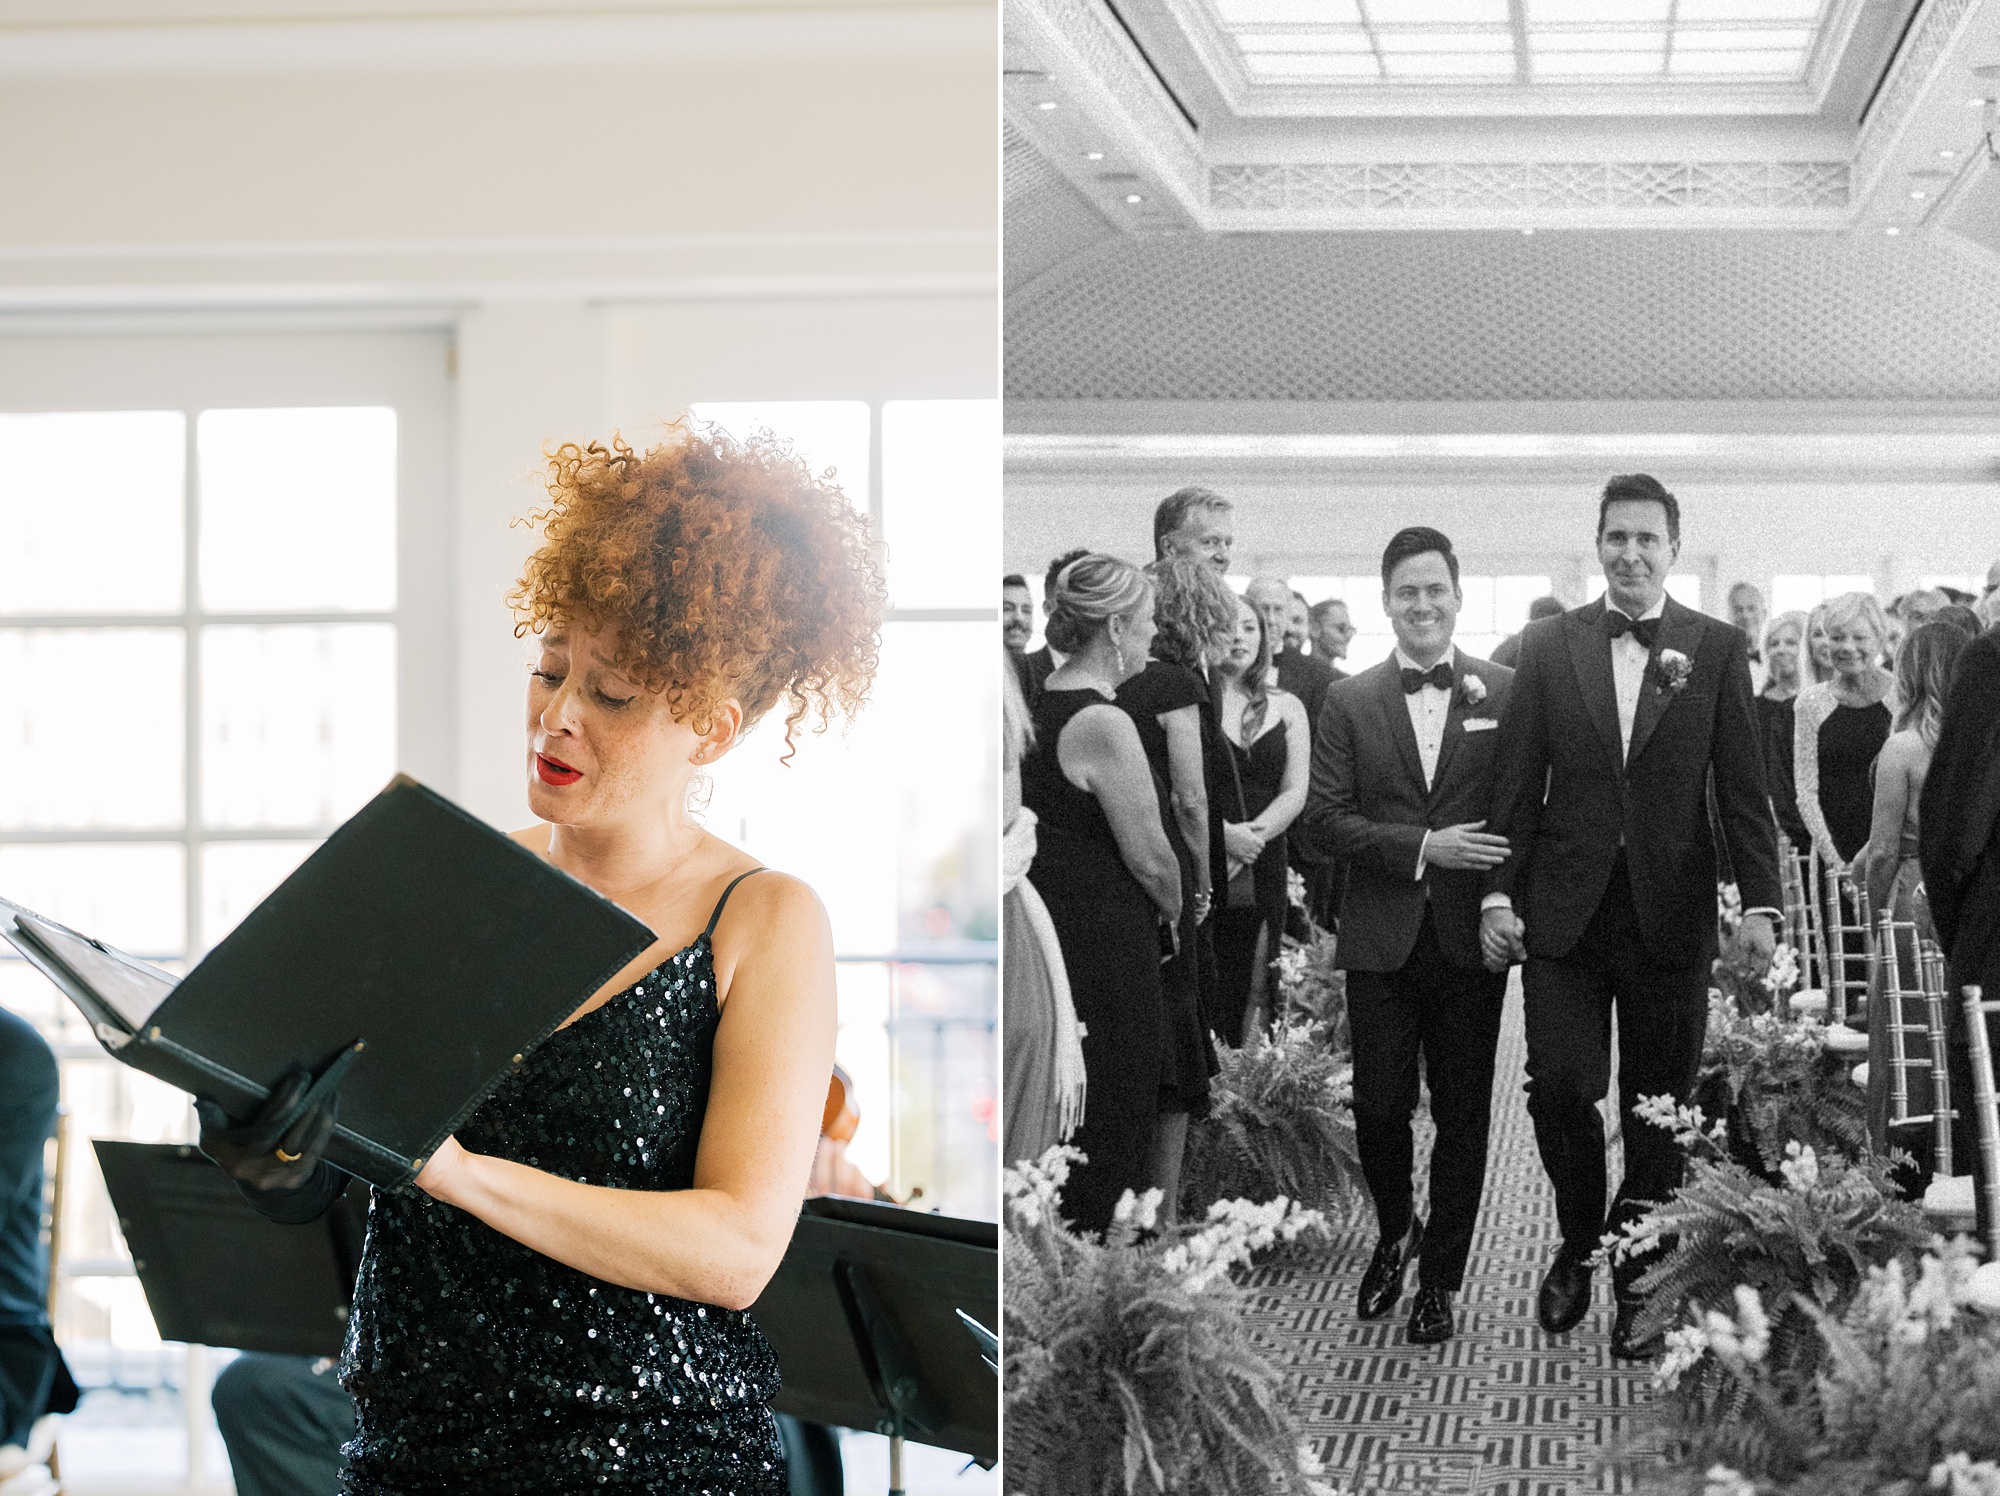 singer performs as grooms enter ceremony at the Hay Adams Hotel